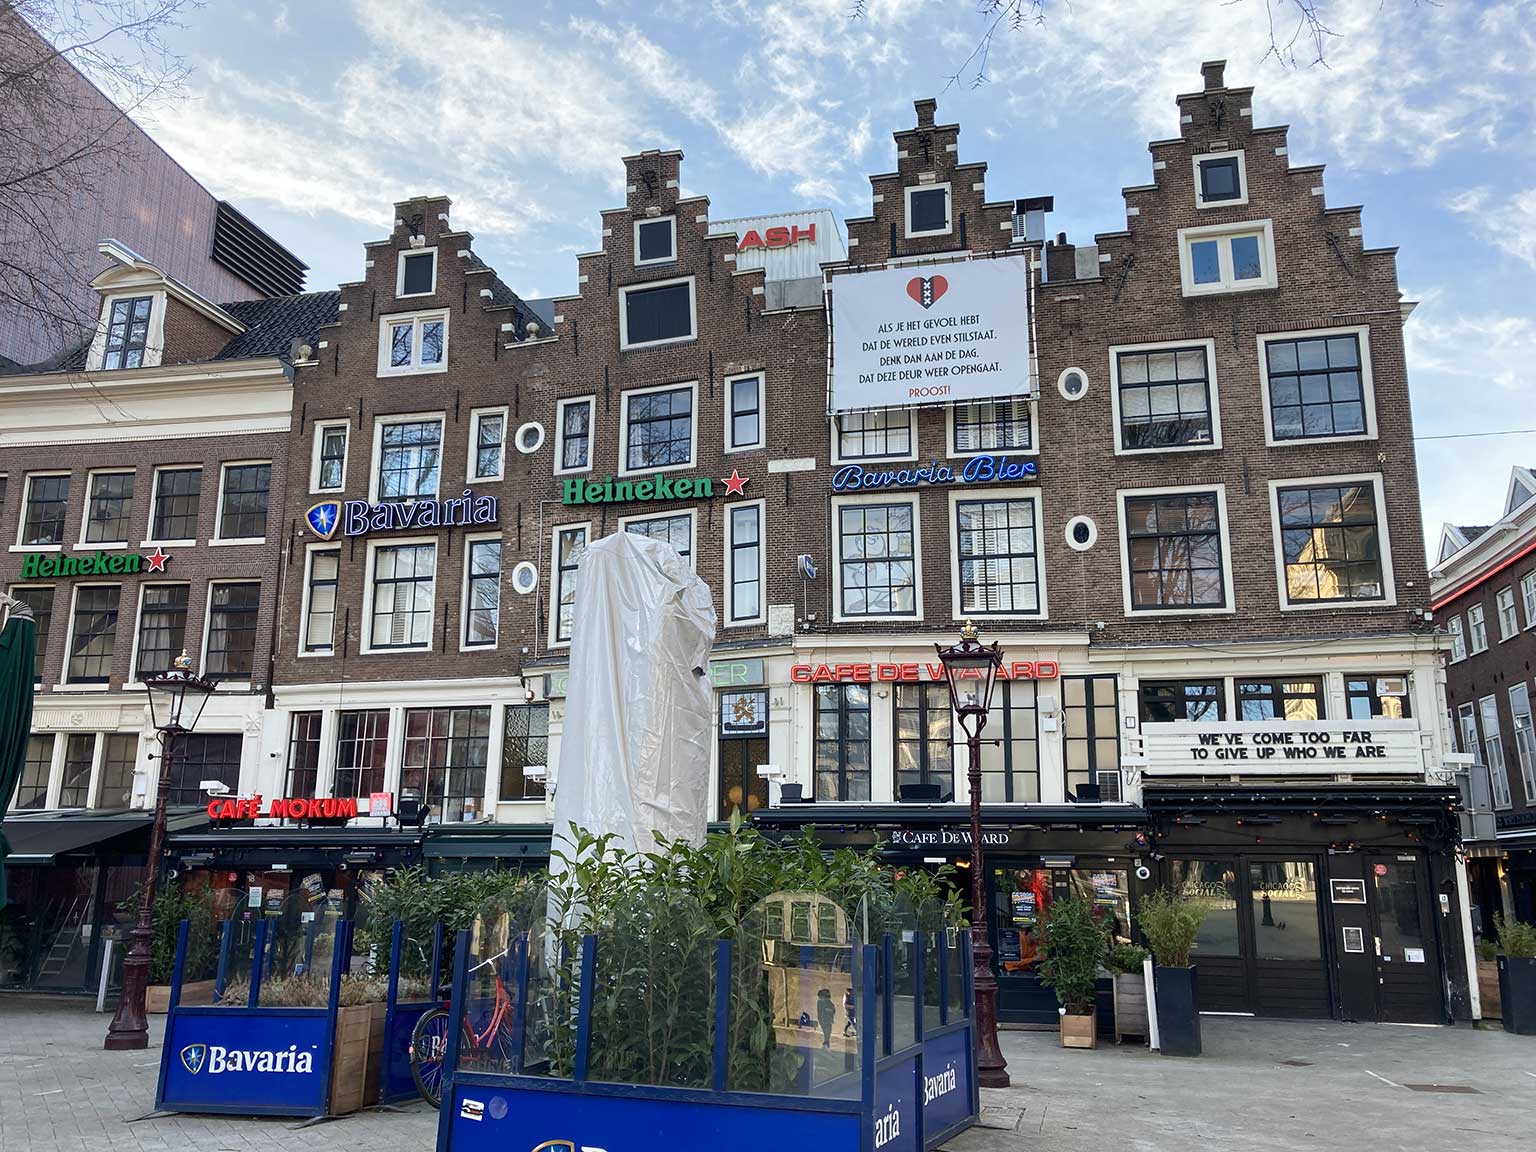 North side of the Leidseplein, Amsterdam, deserted in COVID-times (February 2021)